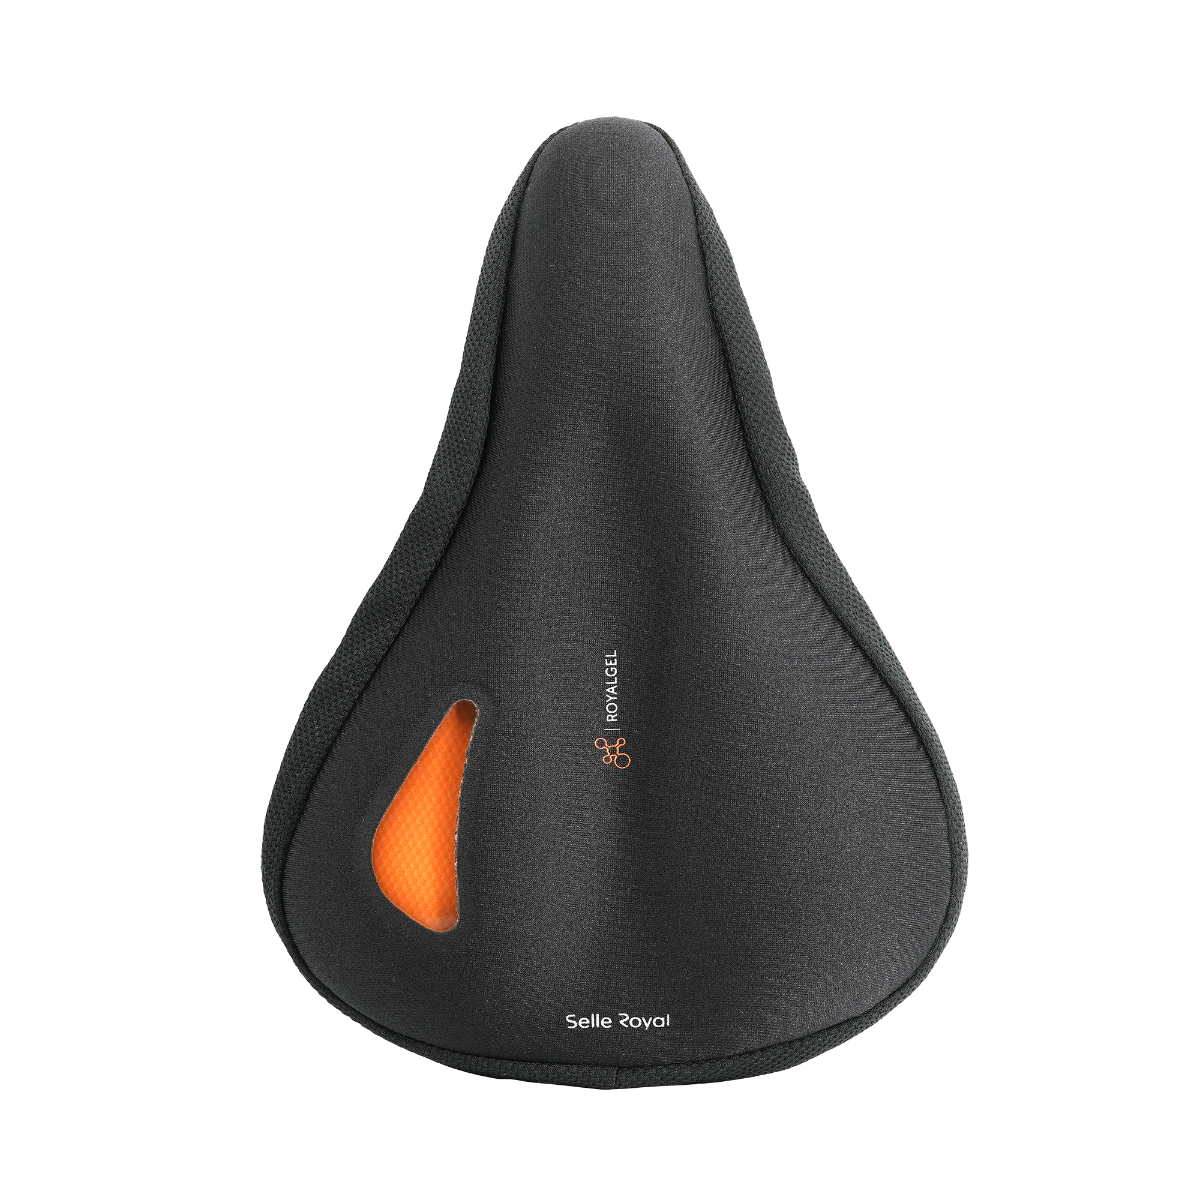 Royalgel Seat Cover - Selle Royal Small